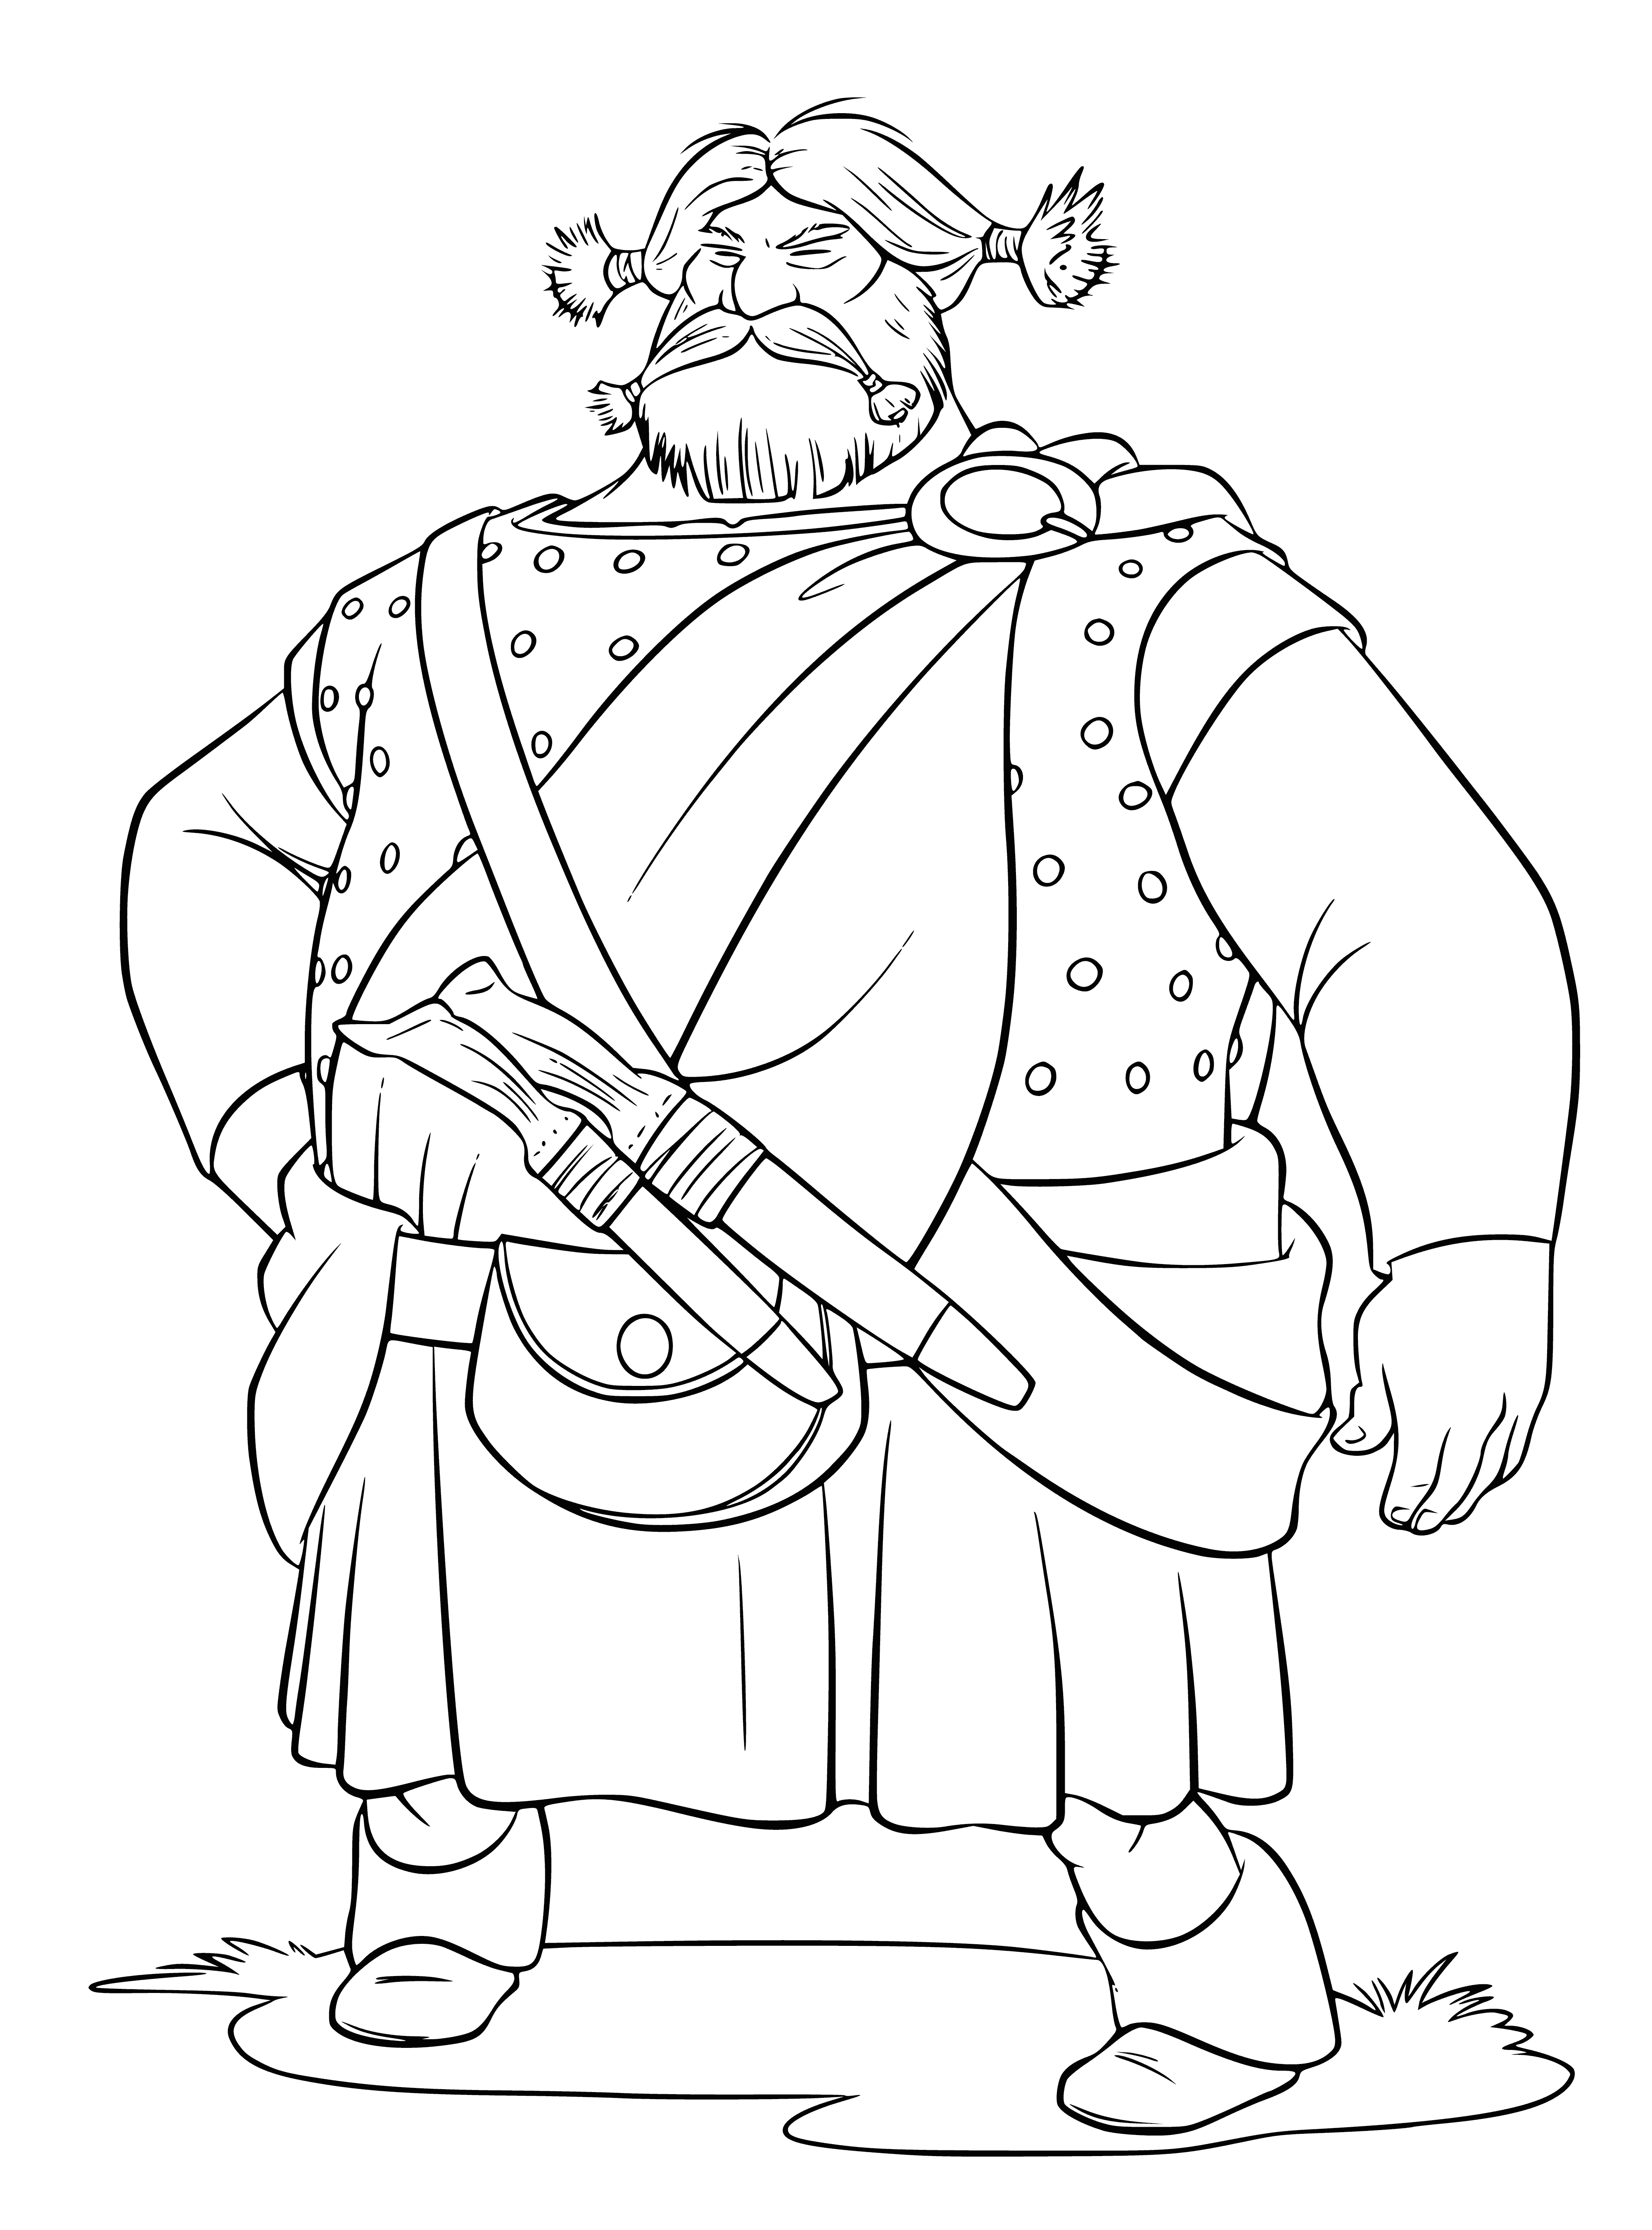 Lord McGuffin coloring page